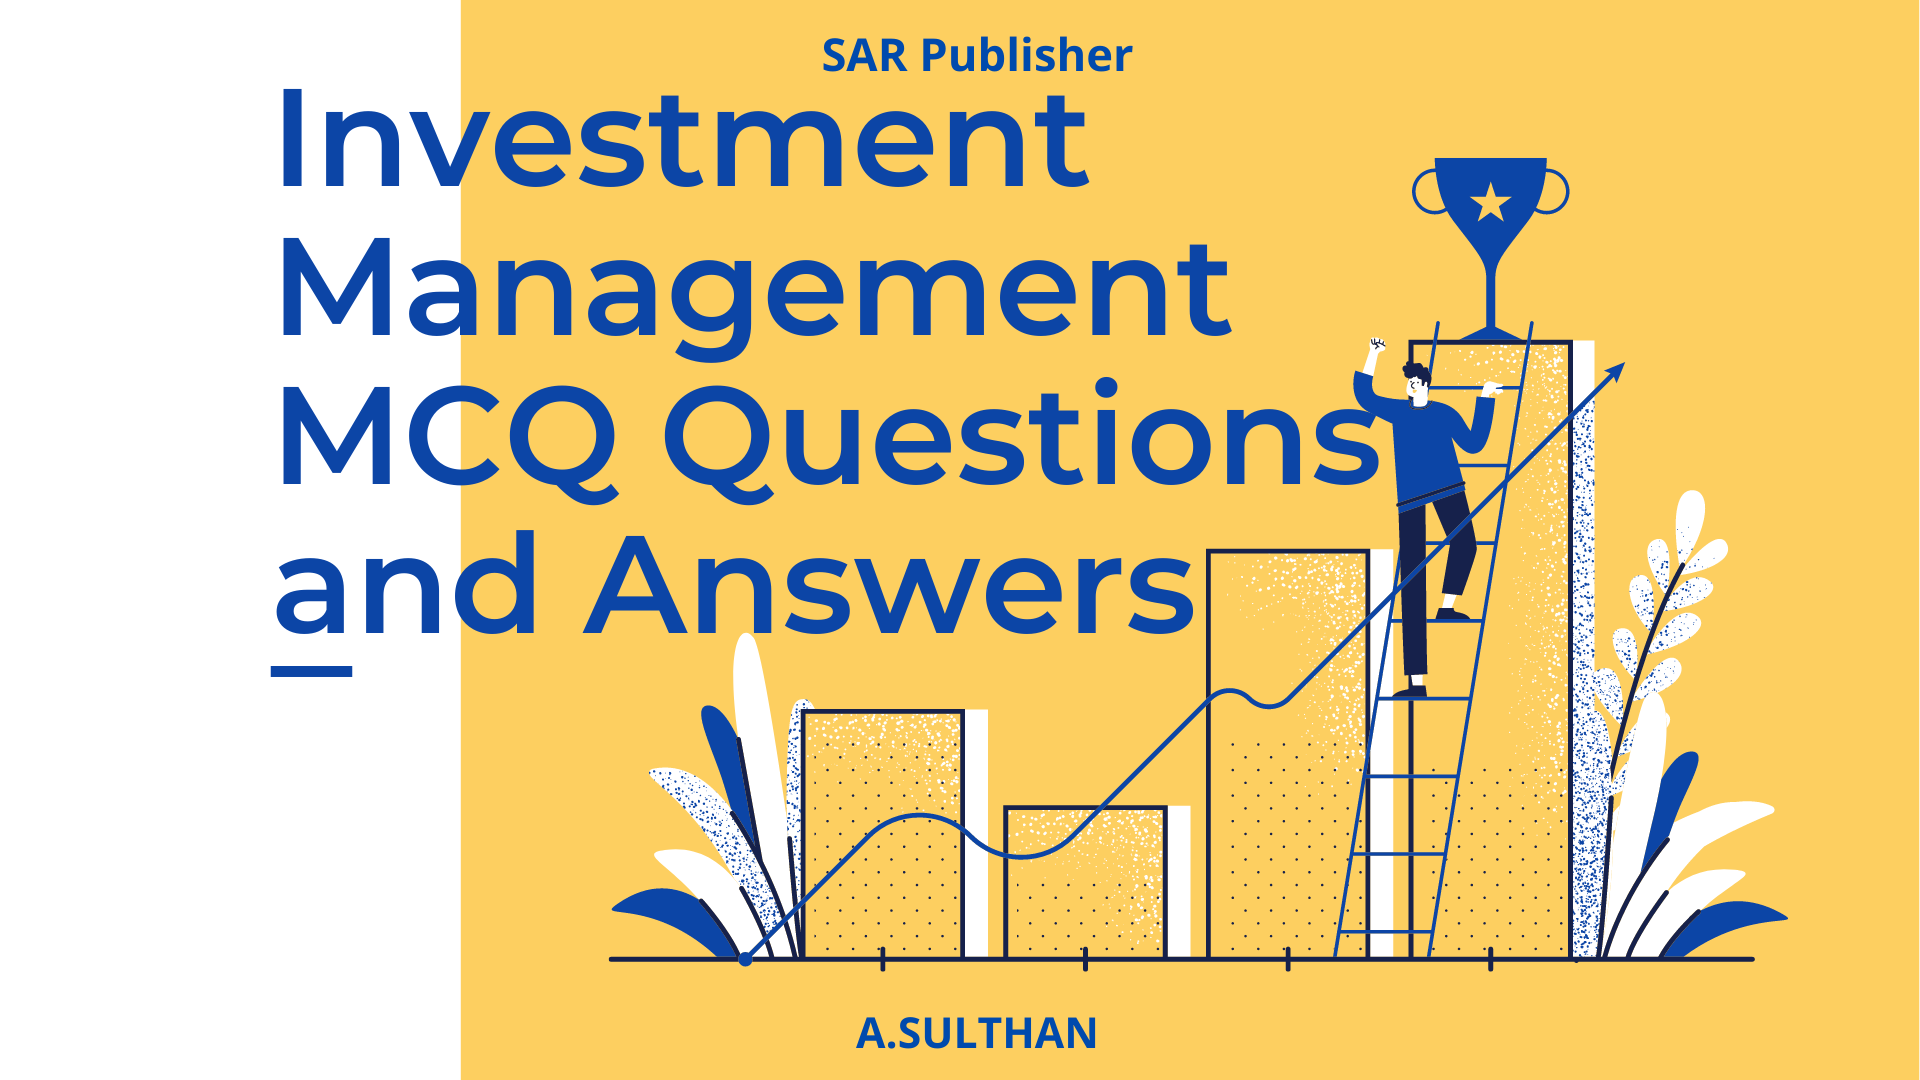 Investment Management Mcq Questions And Answers Part 1 Sar Publisher